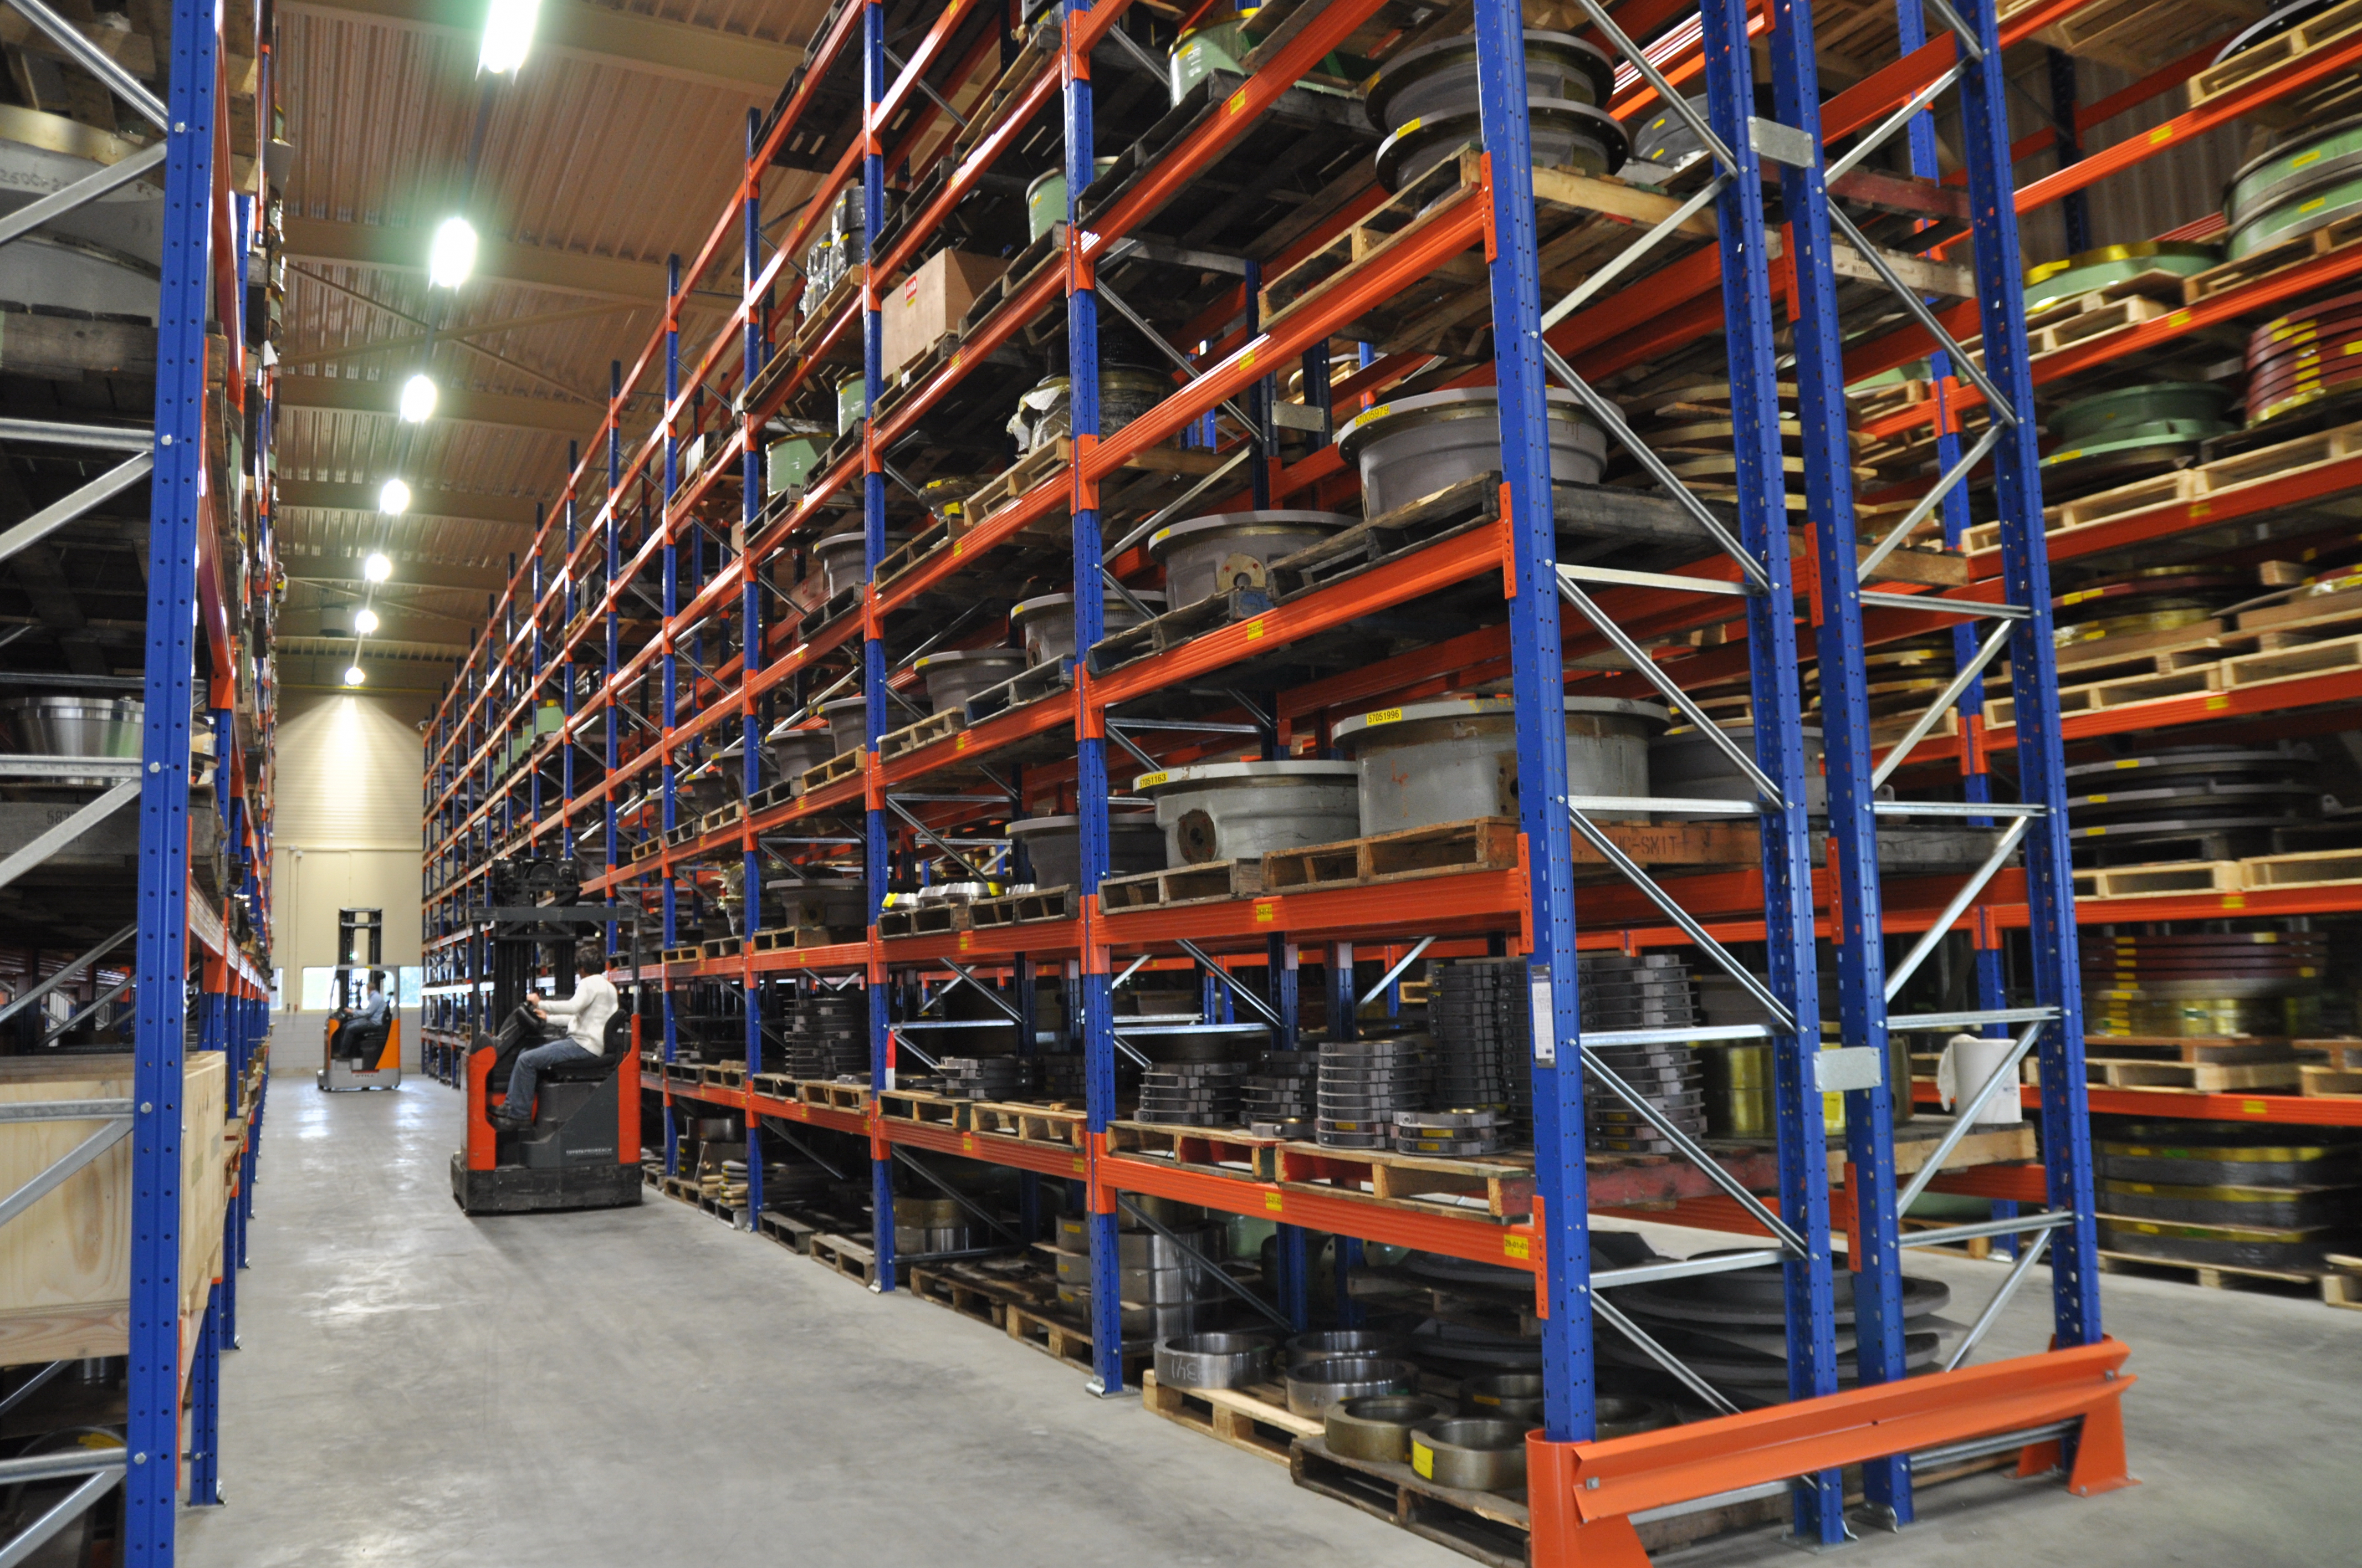 Warehouse filled with racks with spareparts for vessels